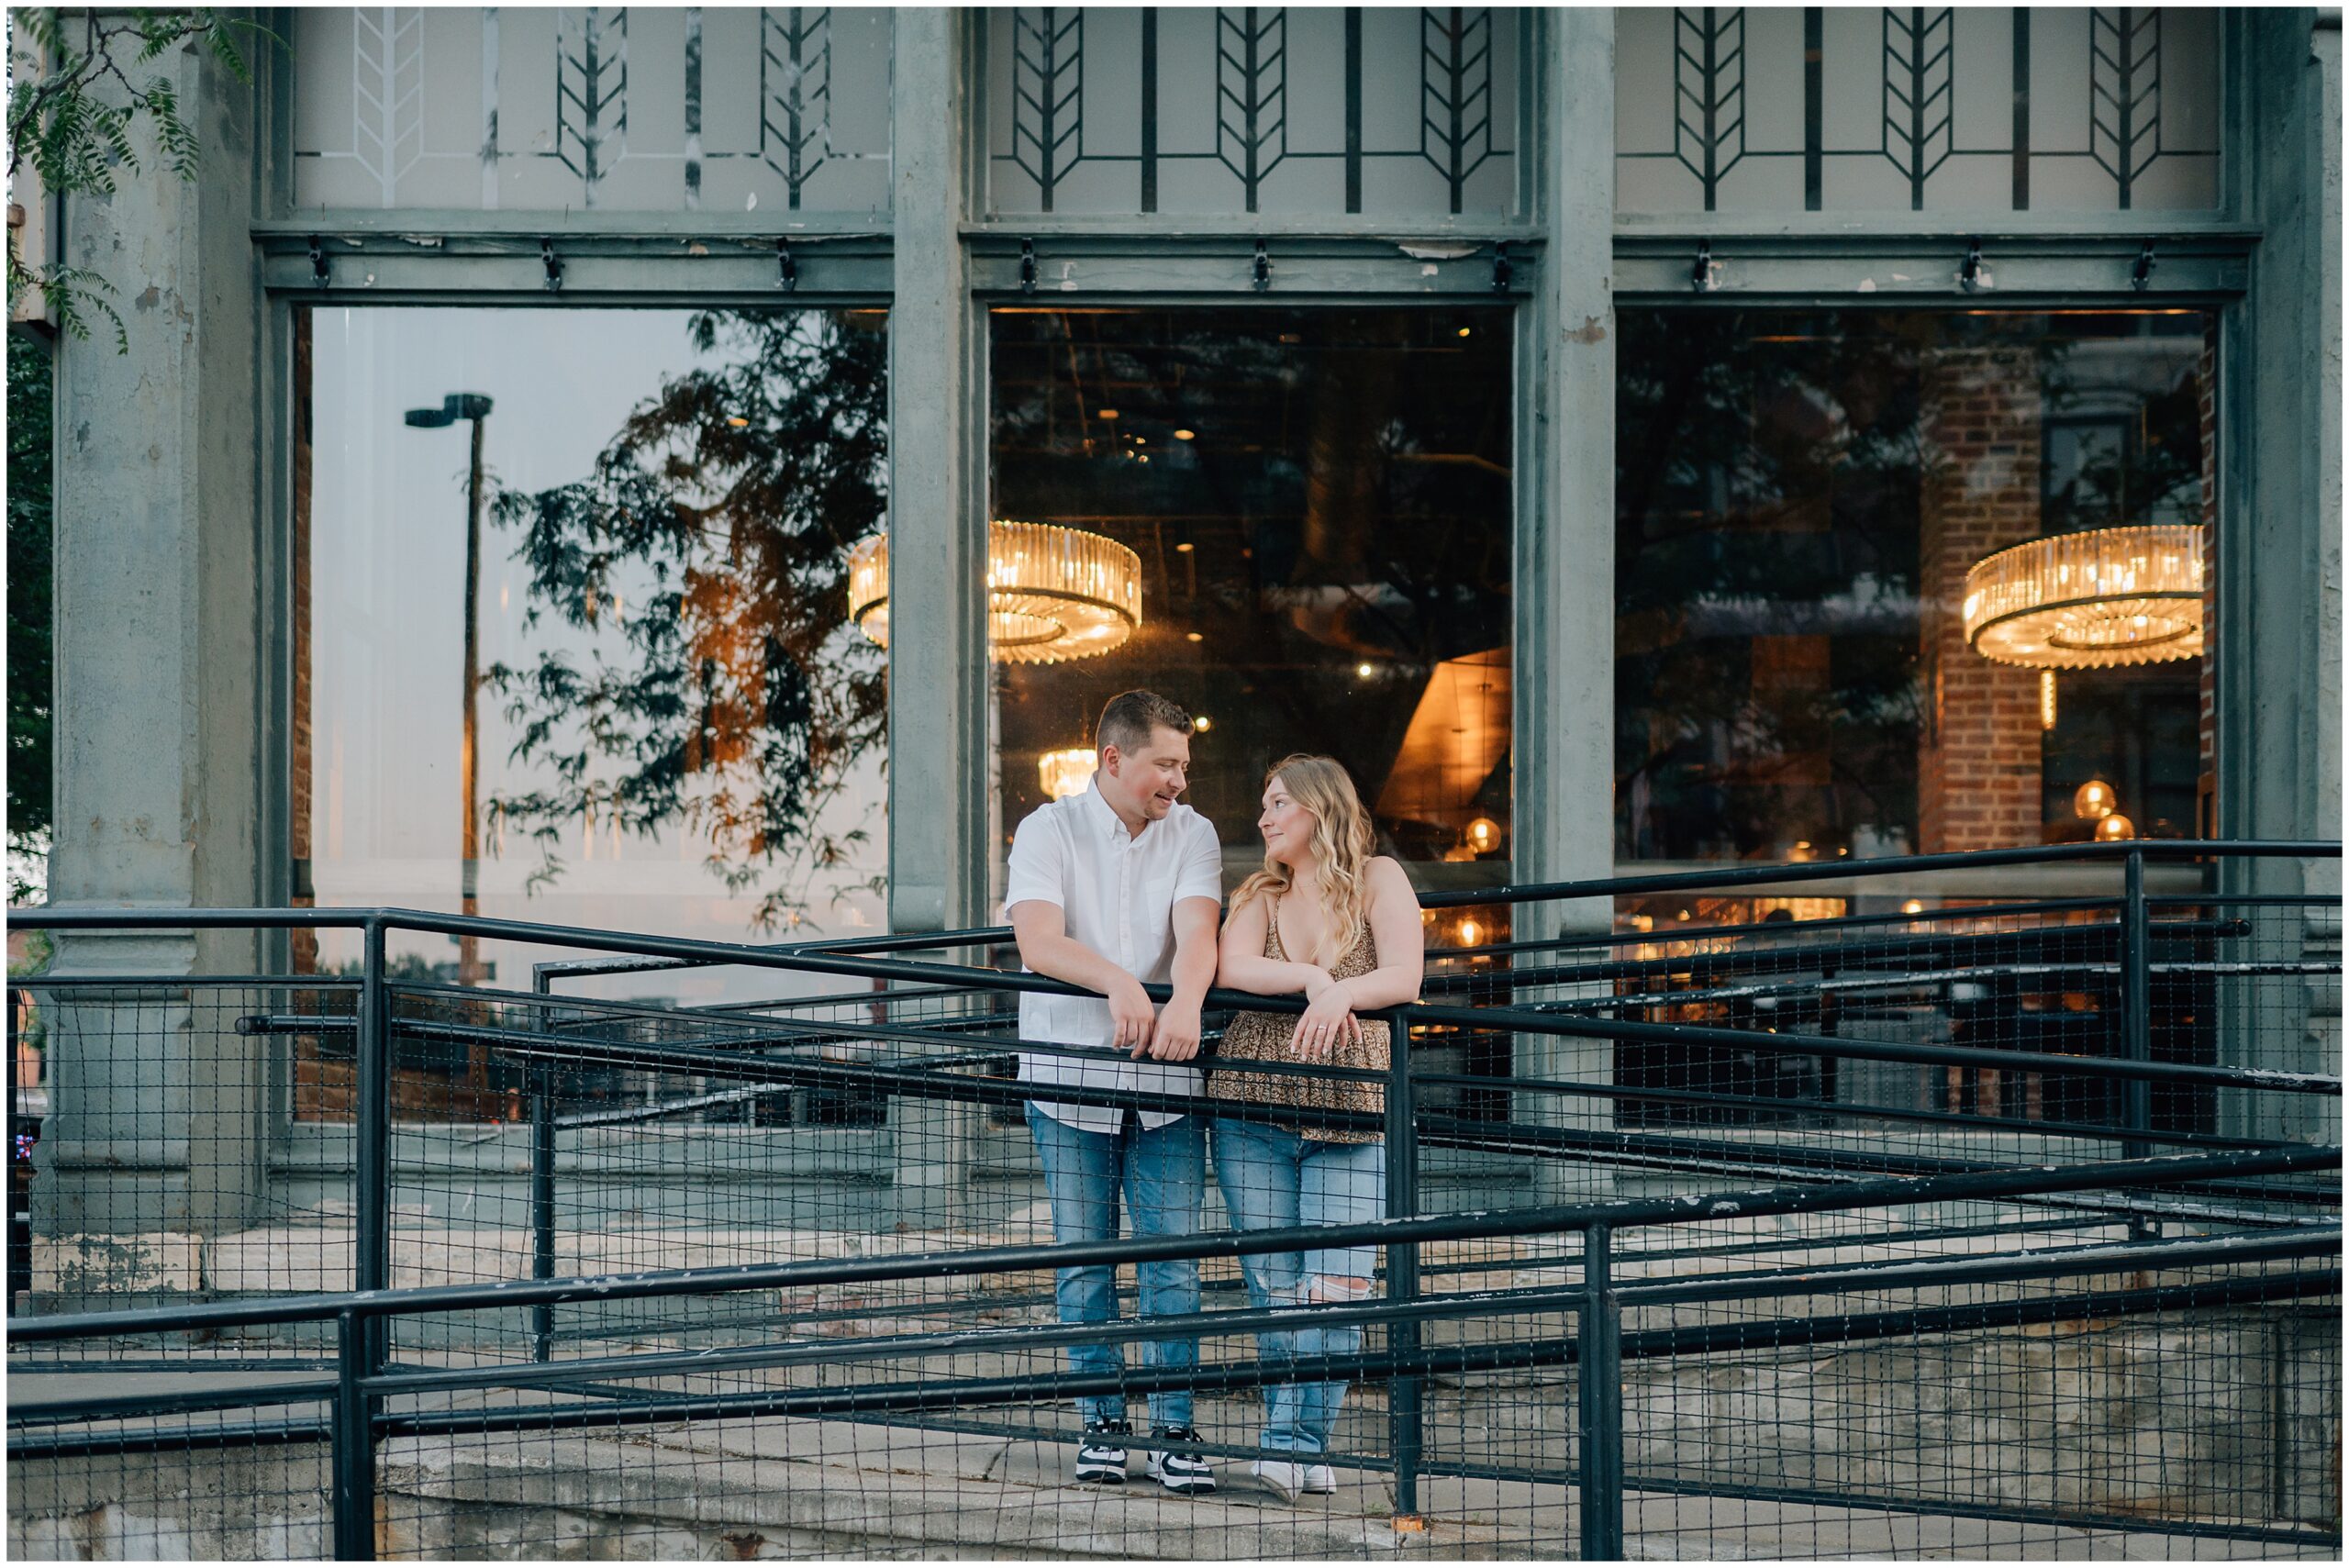 Engaged couple stands outside of a restaurant at the Old Market in Omaha. Photo by Anna Brace, who specializes in Omaha Wedding Photography.